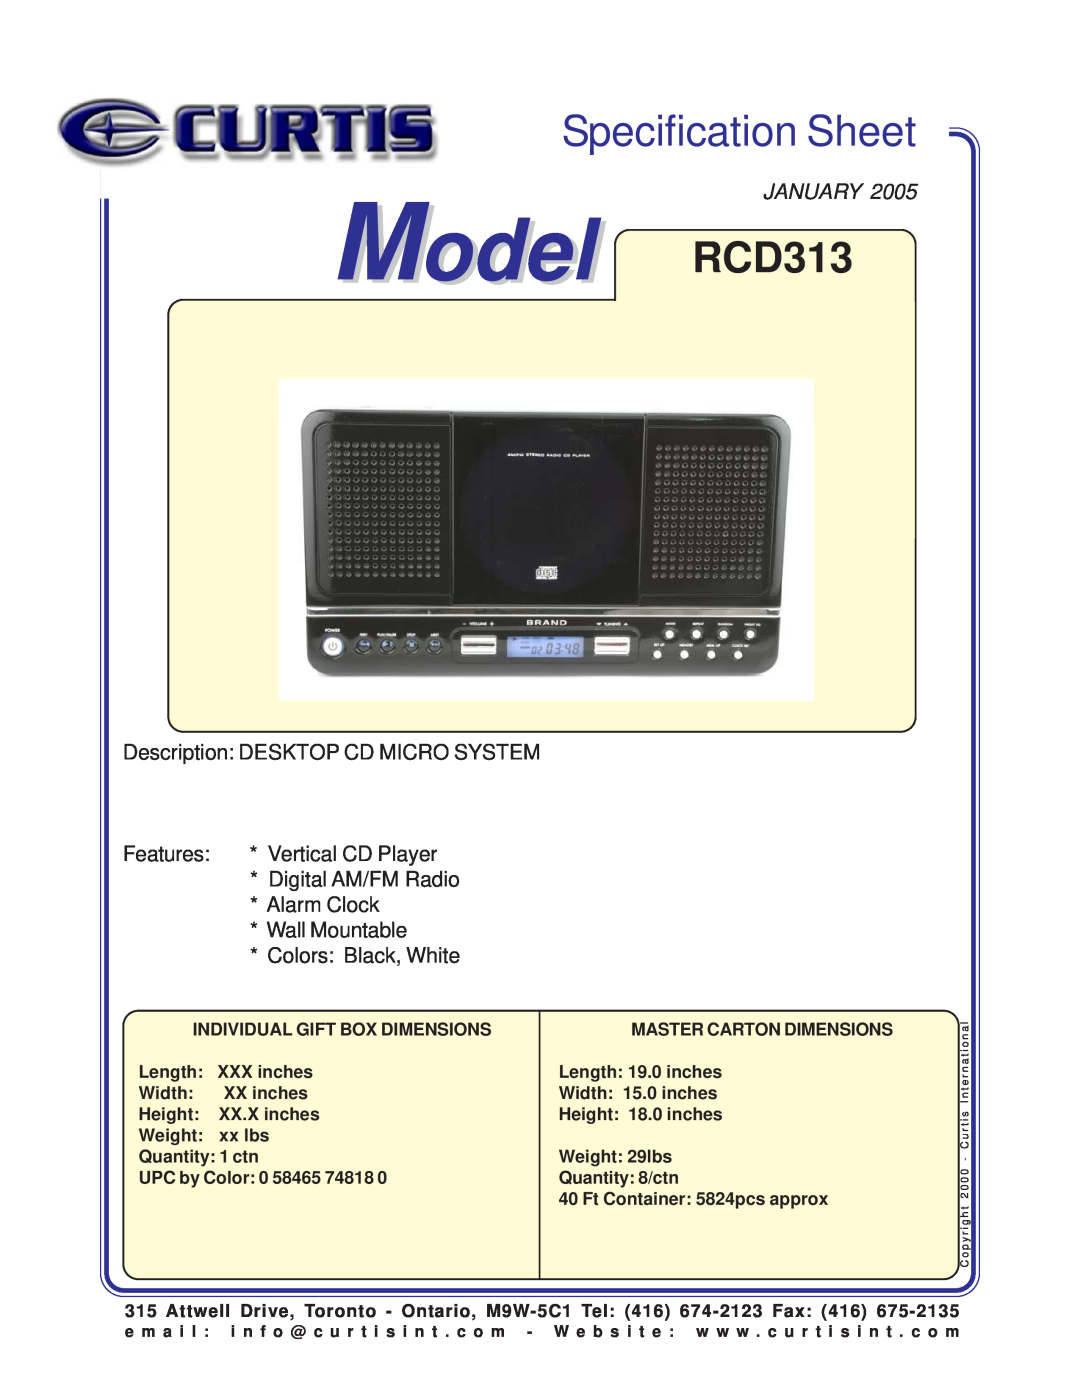 Curtis specifications Specification Sheet, Model RCD313, January, Place Image Here, Description DESKTOP CD MICRO SYSTEM 